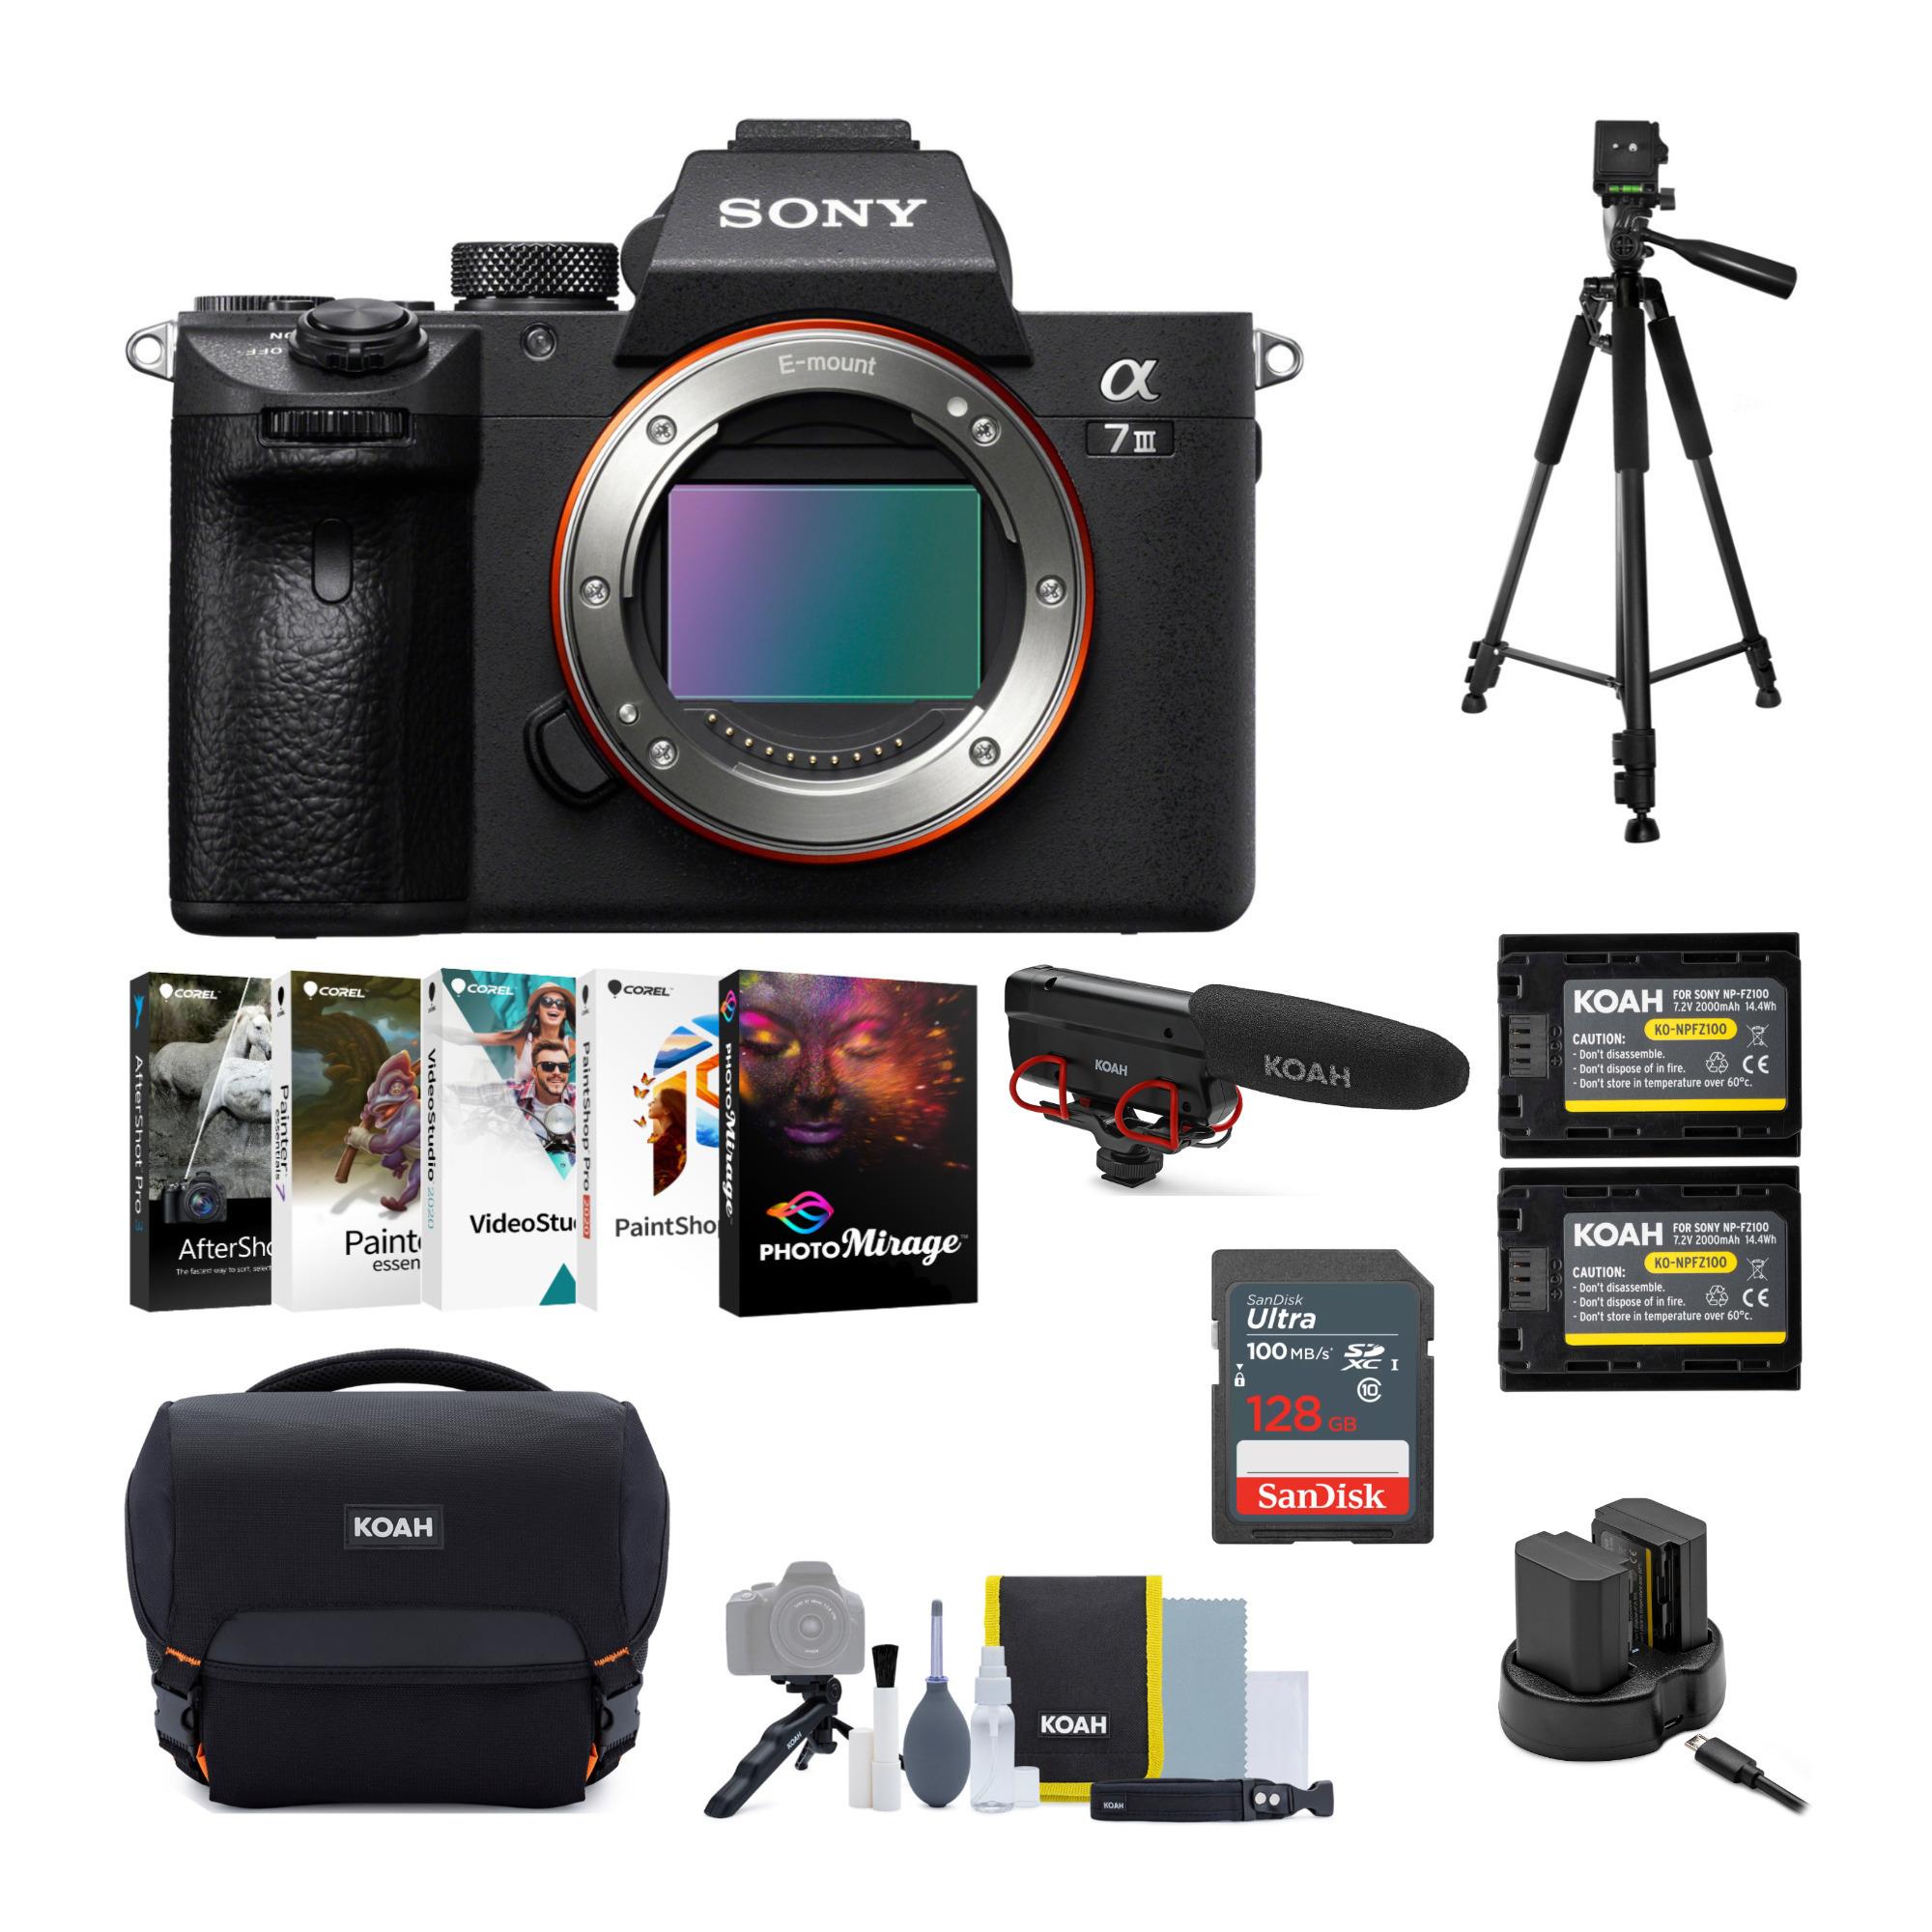 Sony Alpha a7 III Mirrorless Digital Camera (Body Only) Bundle with Accessories - image 1 of 8